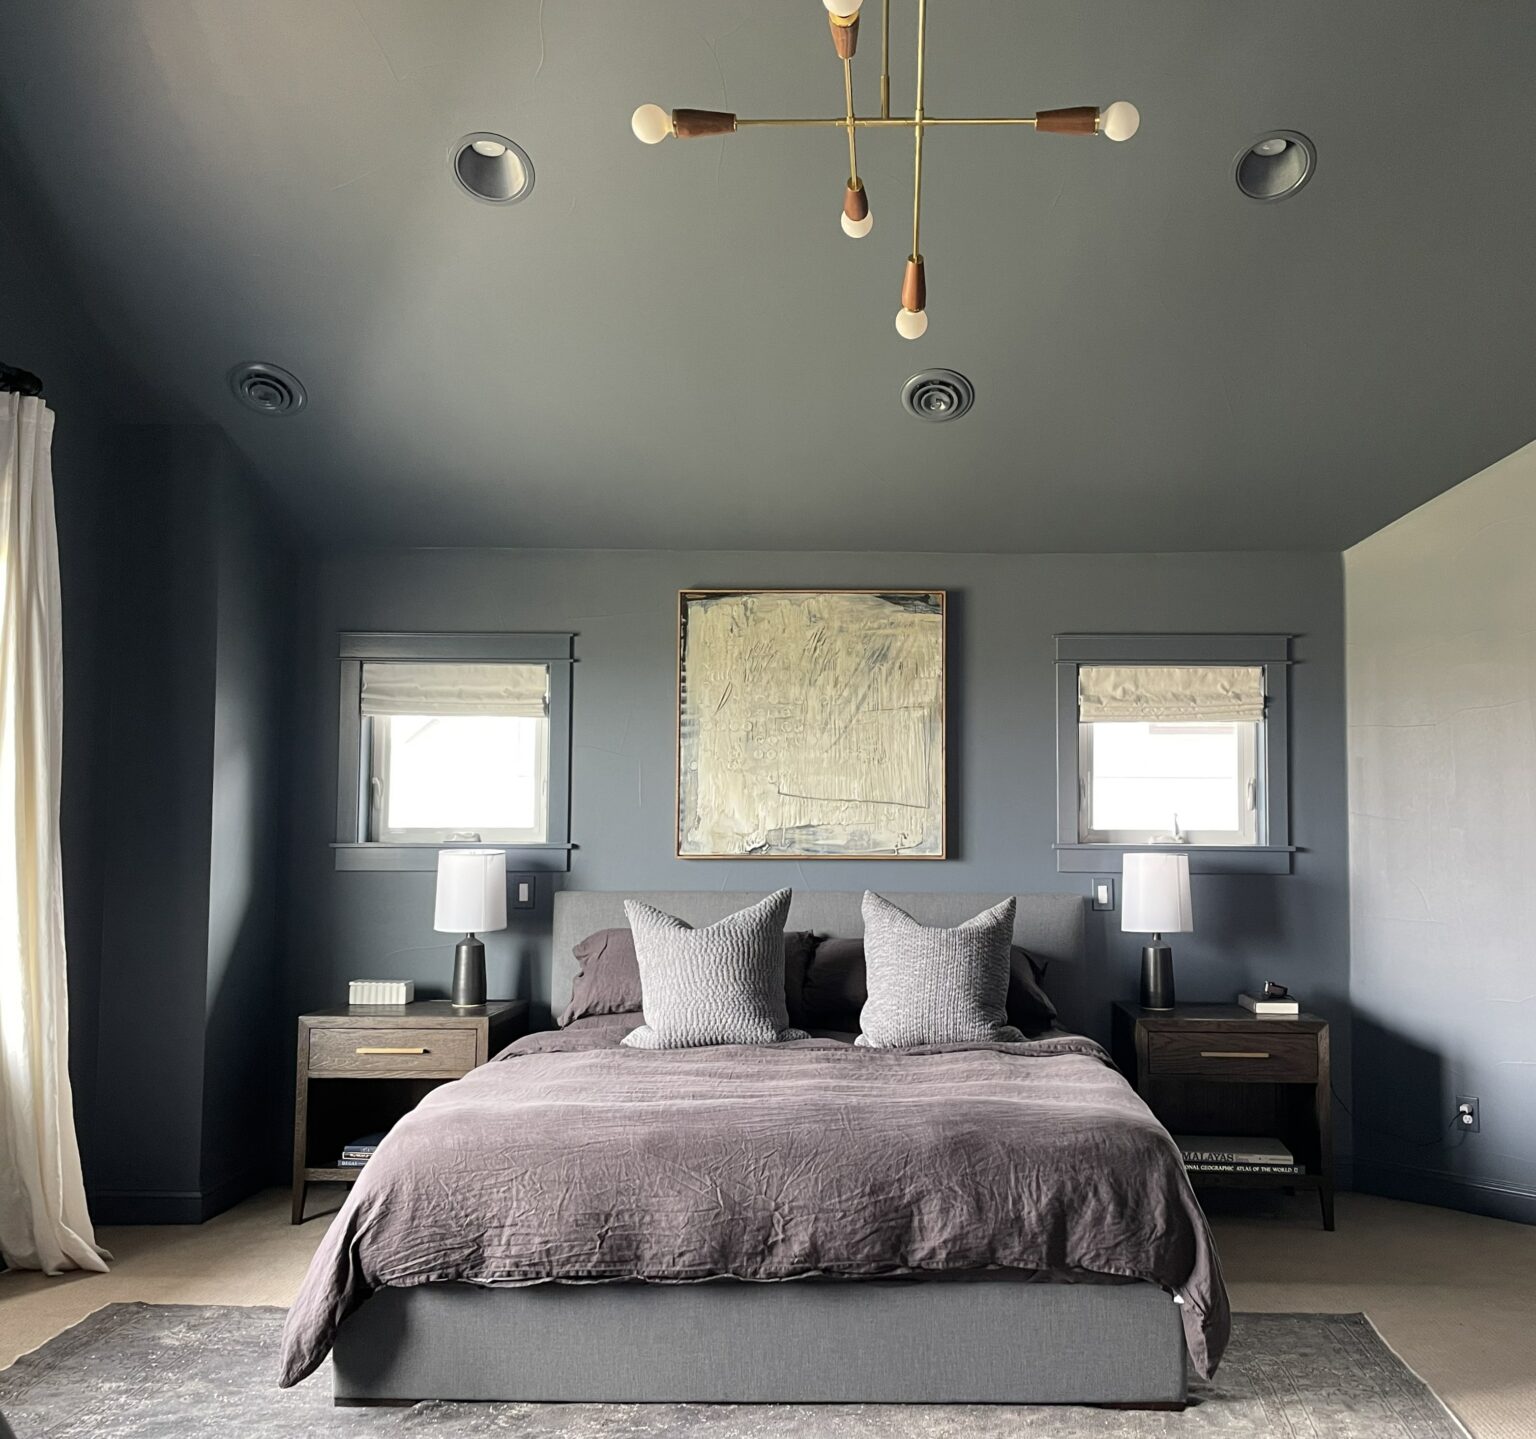 A bedroom is painted with BM Granite Peak on the walls and ceiling.